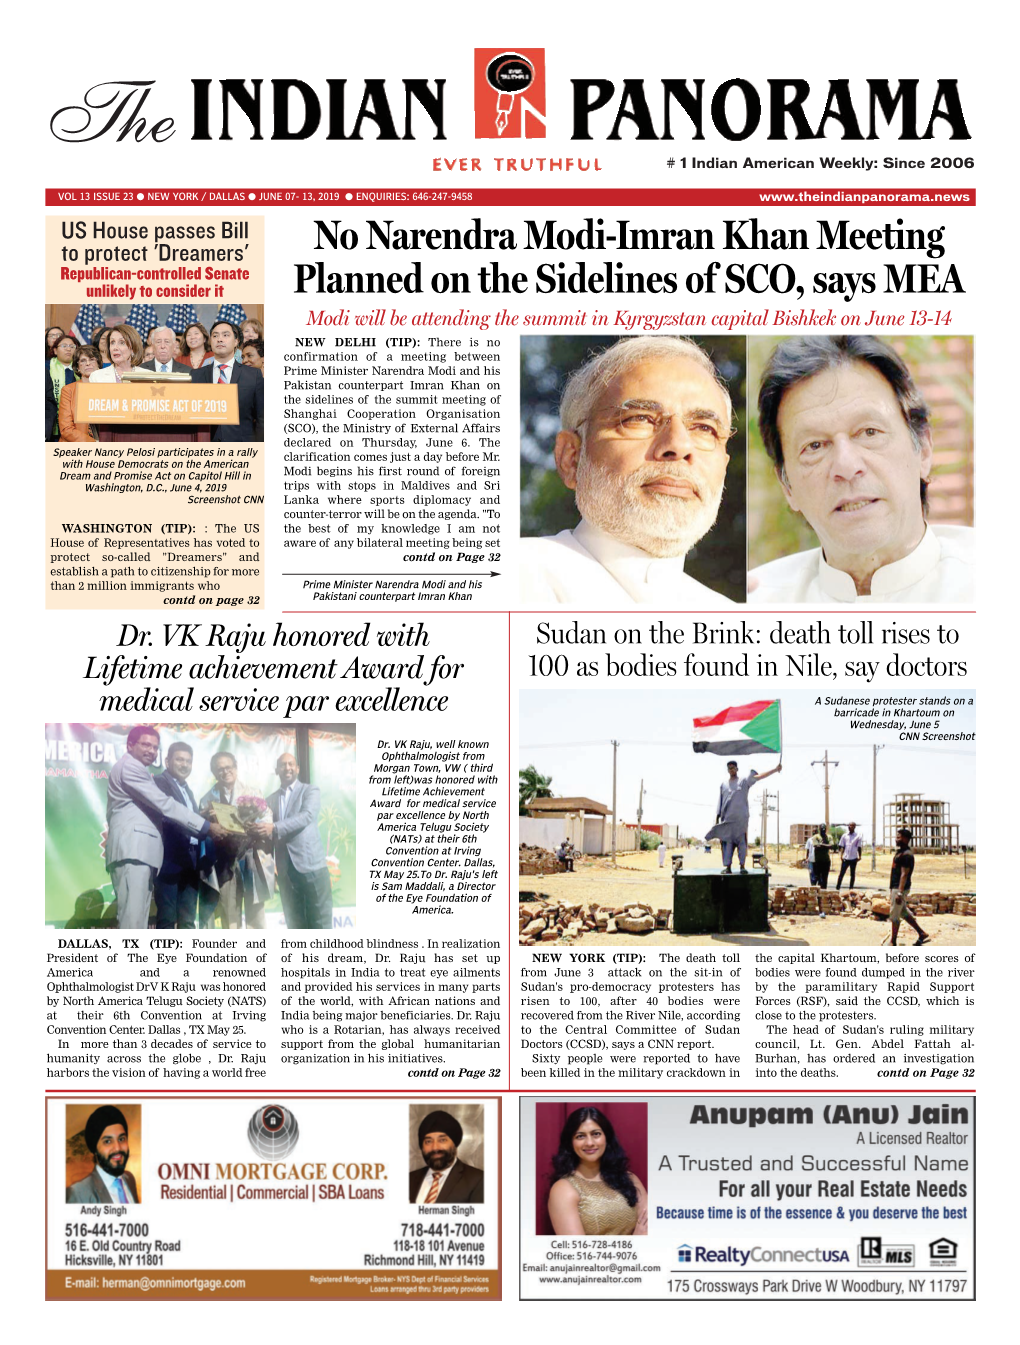 No Narendra Modi-Imran Khan Meeting Planned on the Sidelines